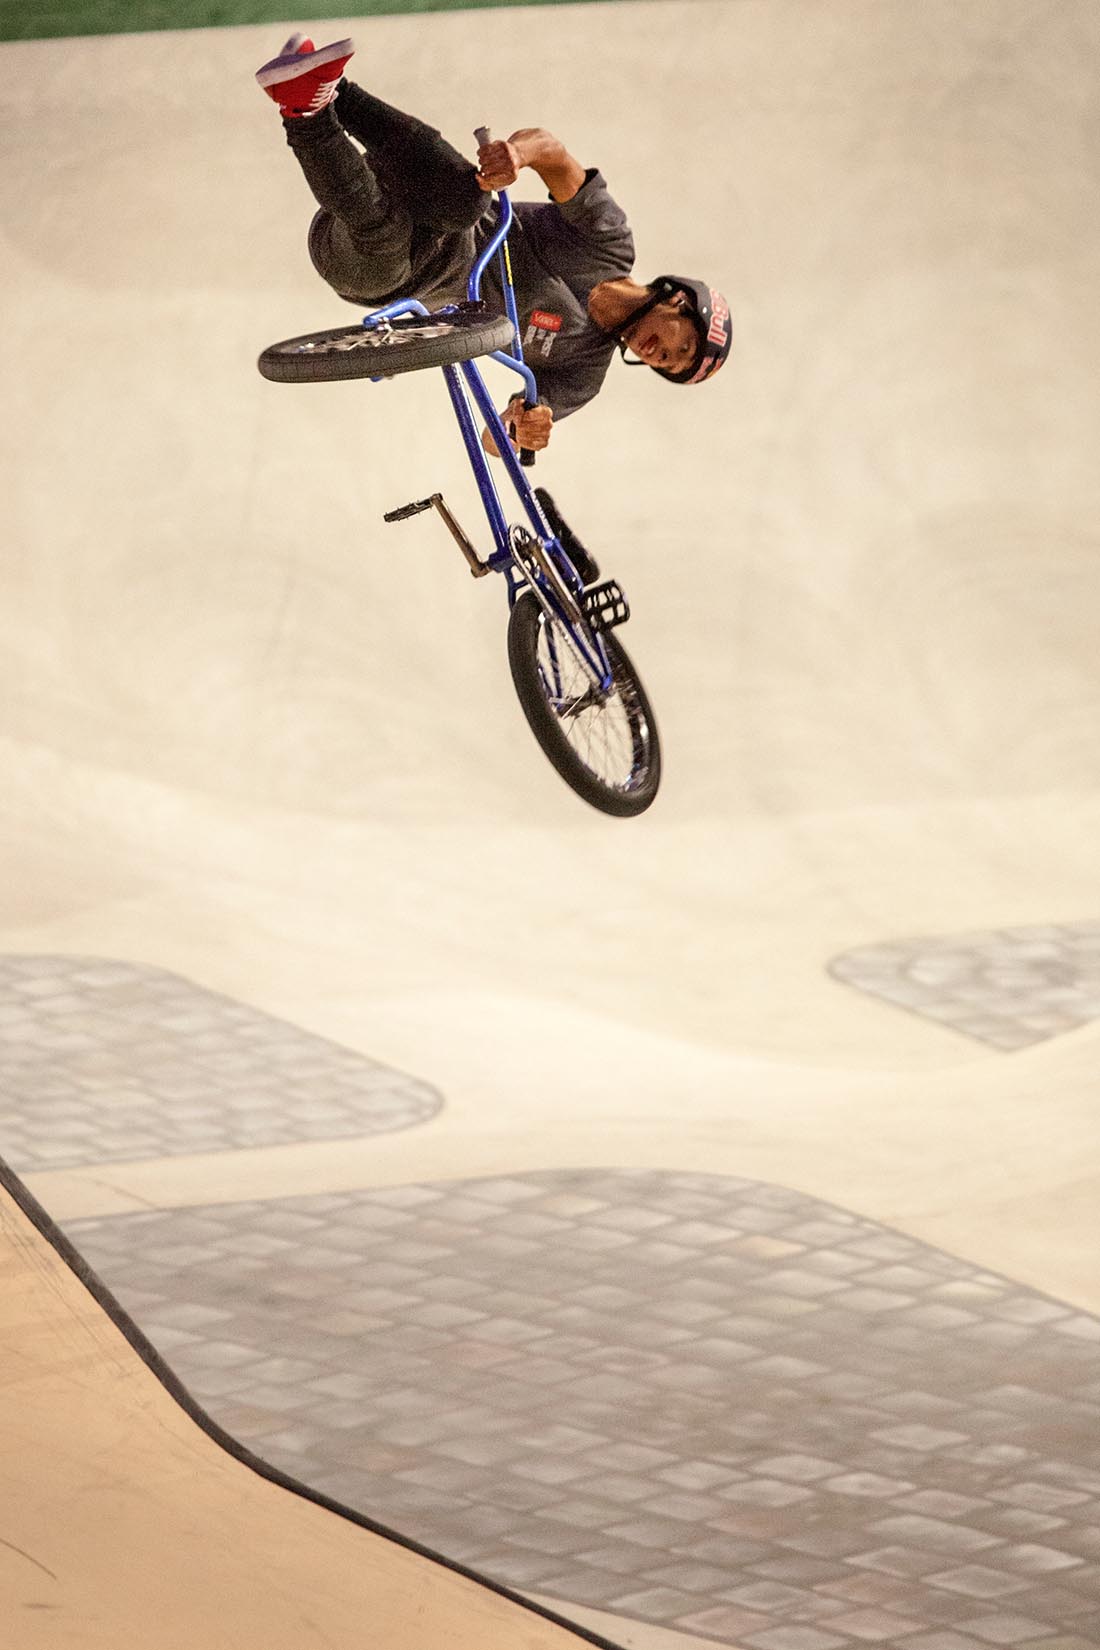 Daniel Sandoval performing at X games in the Olympia park in Munich, Germany on the 29th of June 2013